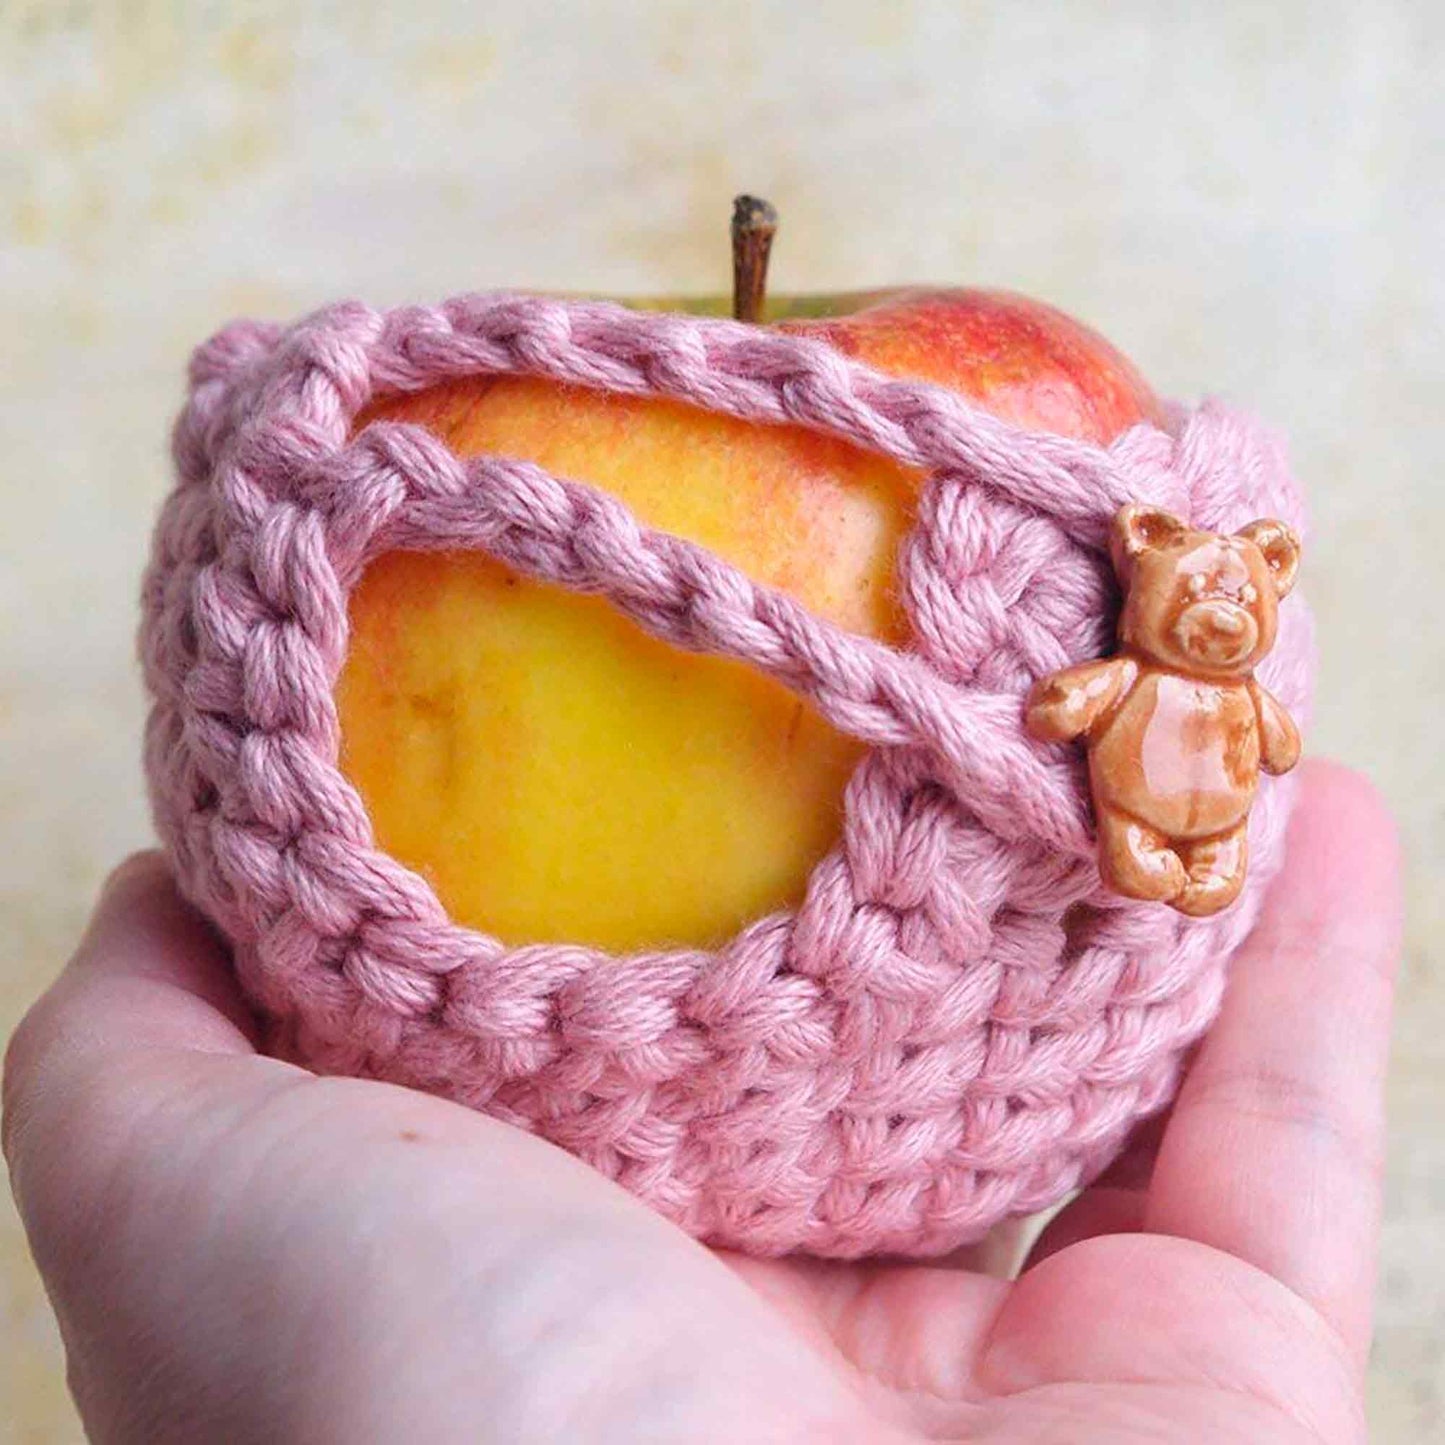 Pink Cozy Apple Bag - Handmade Crochet Cover - Zero Waste Gift - Bear button - Cute and convenient